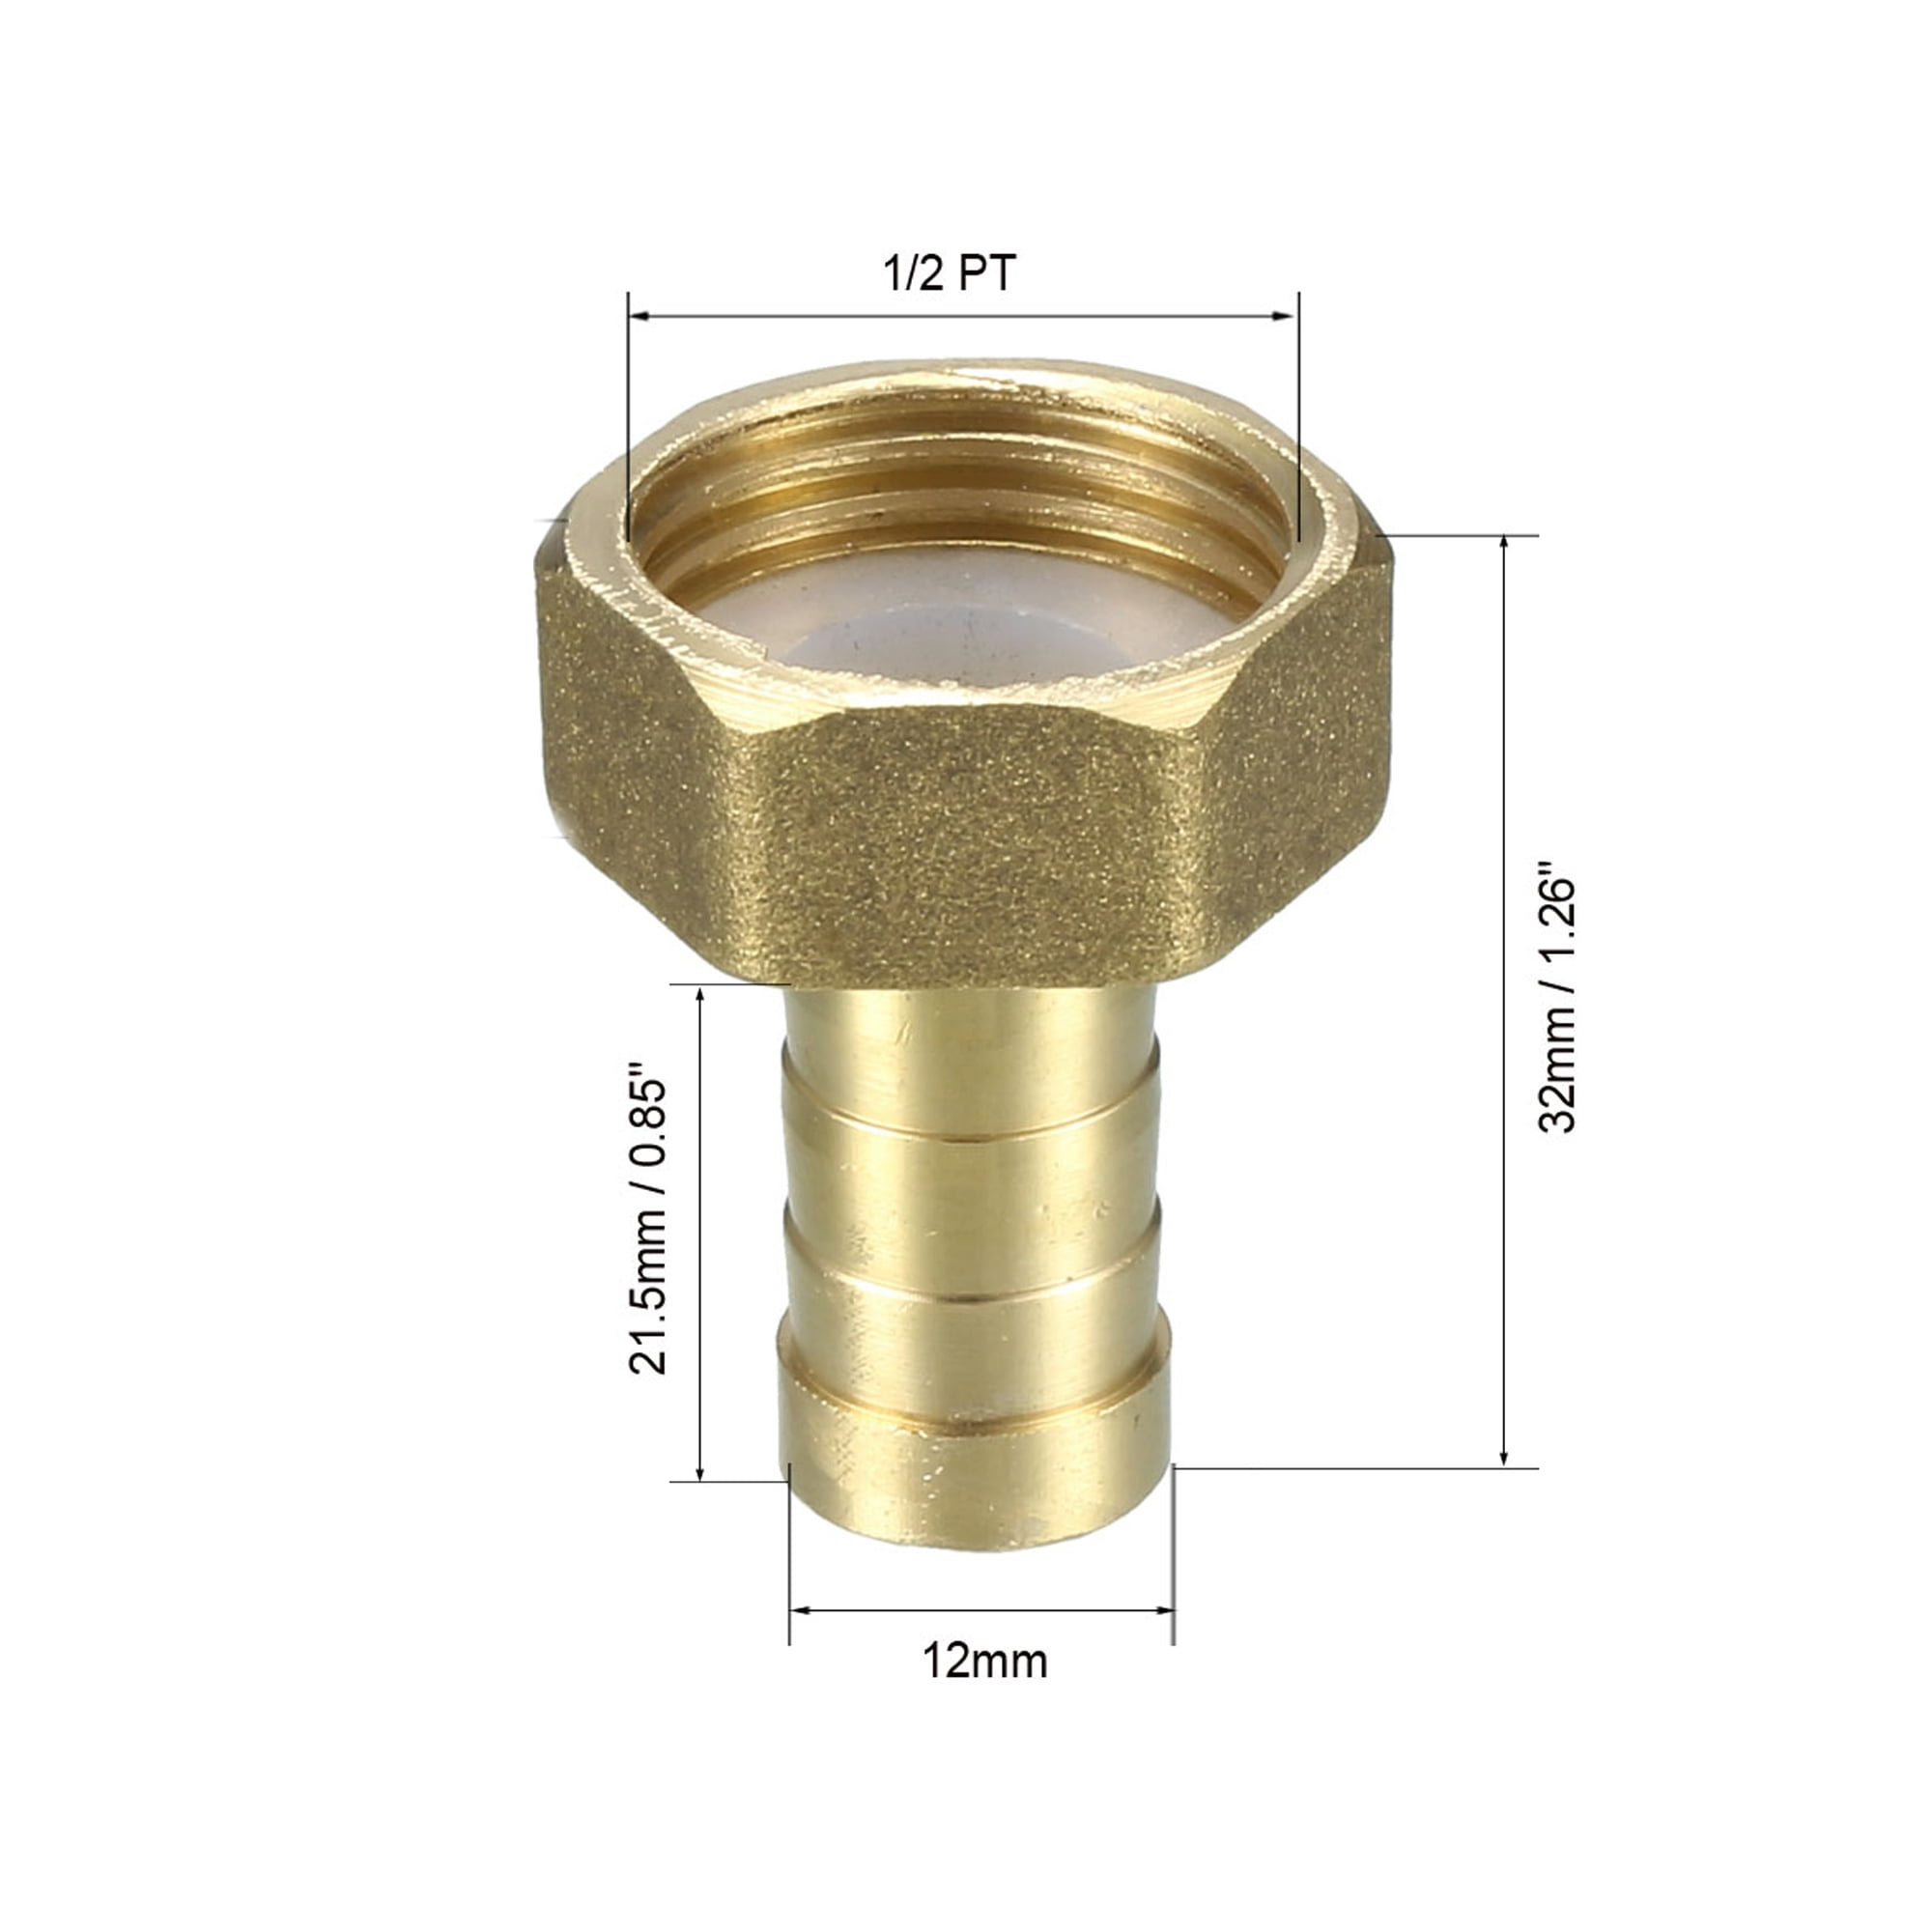 uxcell Brass Barb Hose Fitting Connector Adapter 12mm Barbed x 1/2 PT Female Pipe 5pcs